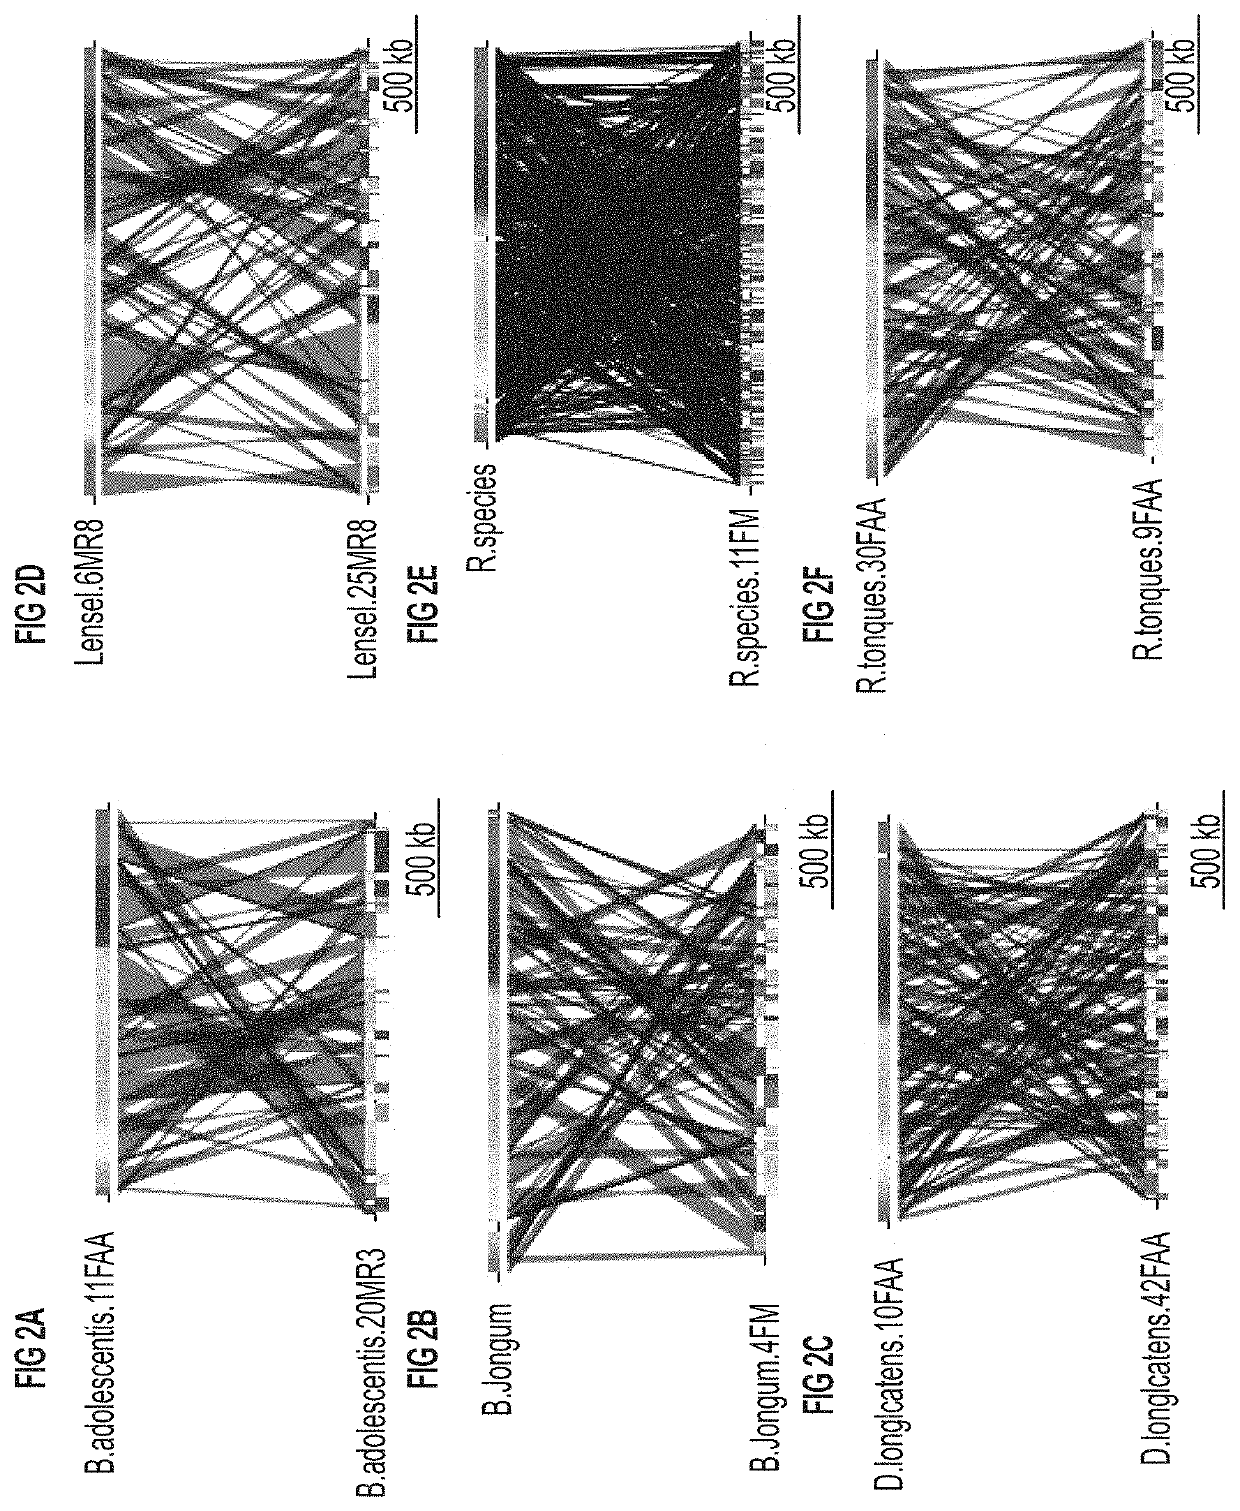 Systems and methods for treating a dysbiosis using fecal-derived bacterial populations